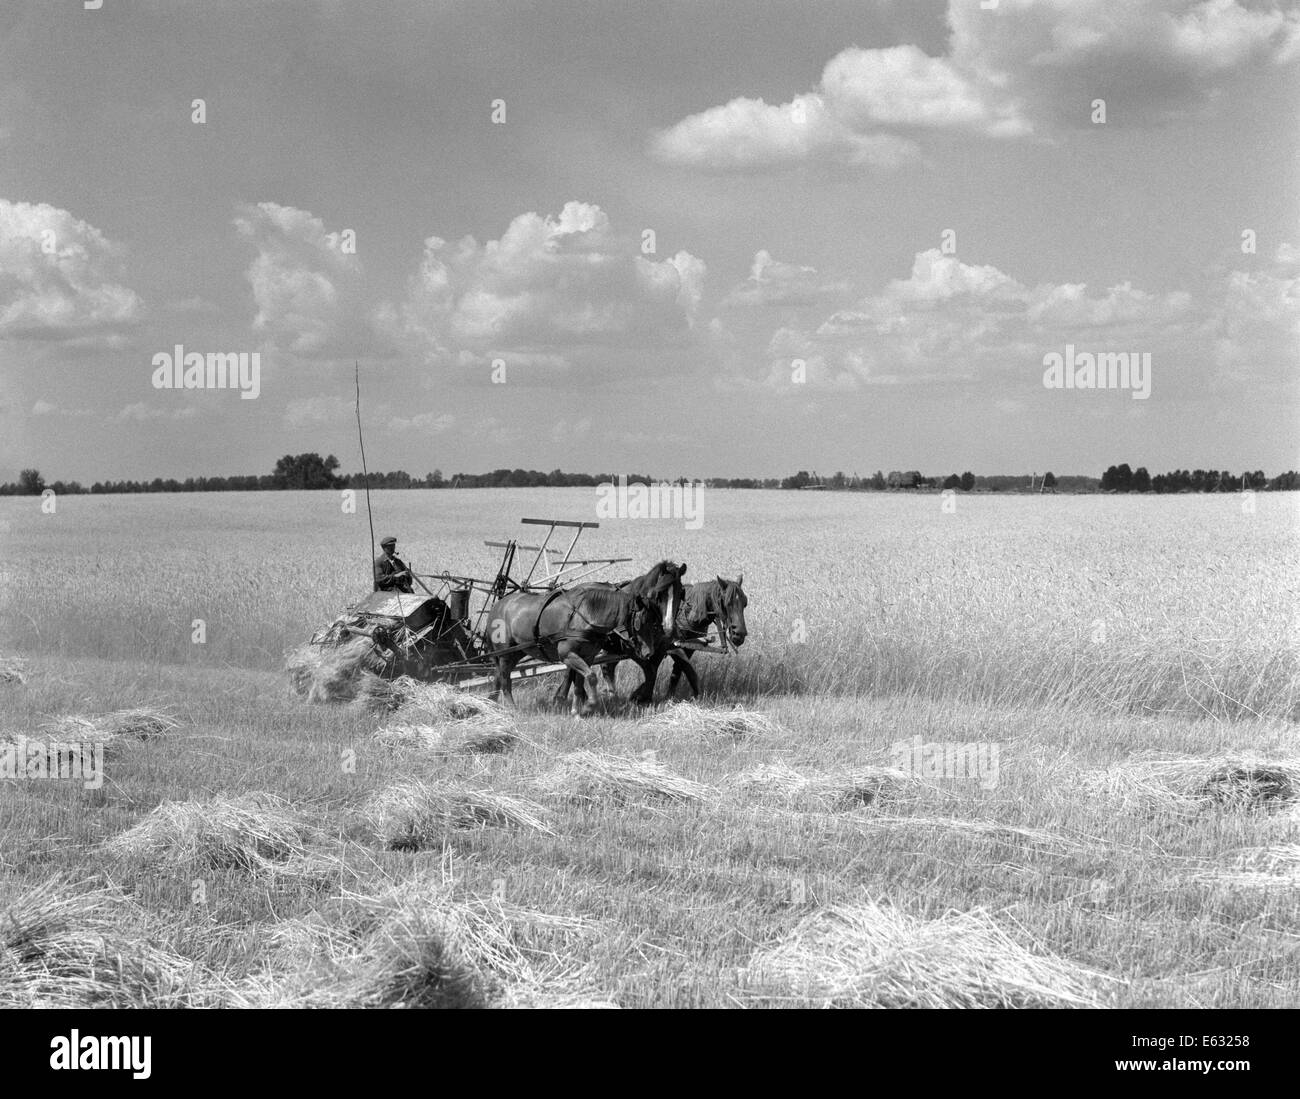 1930s FARMER HARVESTING CROP WITH HORSE DRAWN REAPER Stock Photo